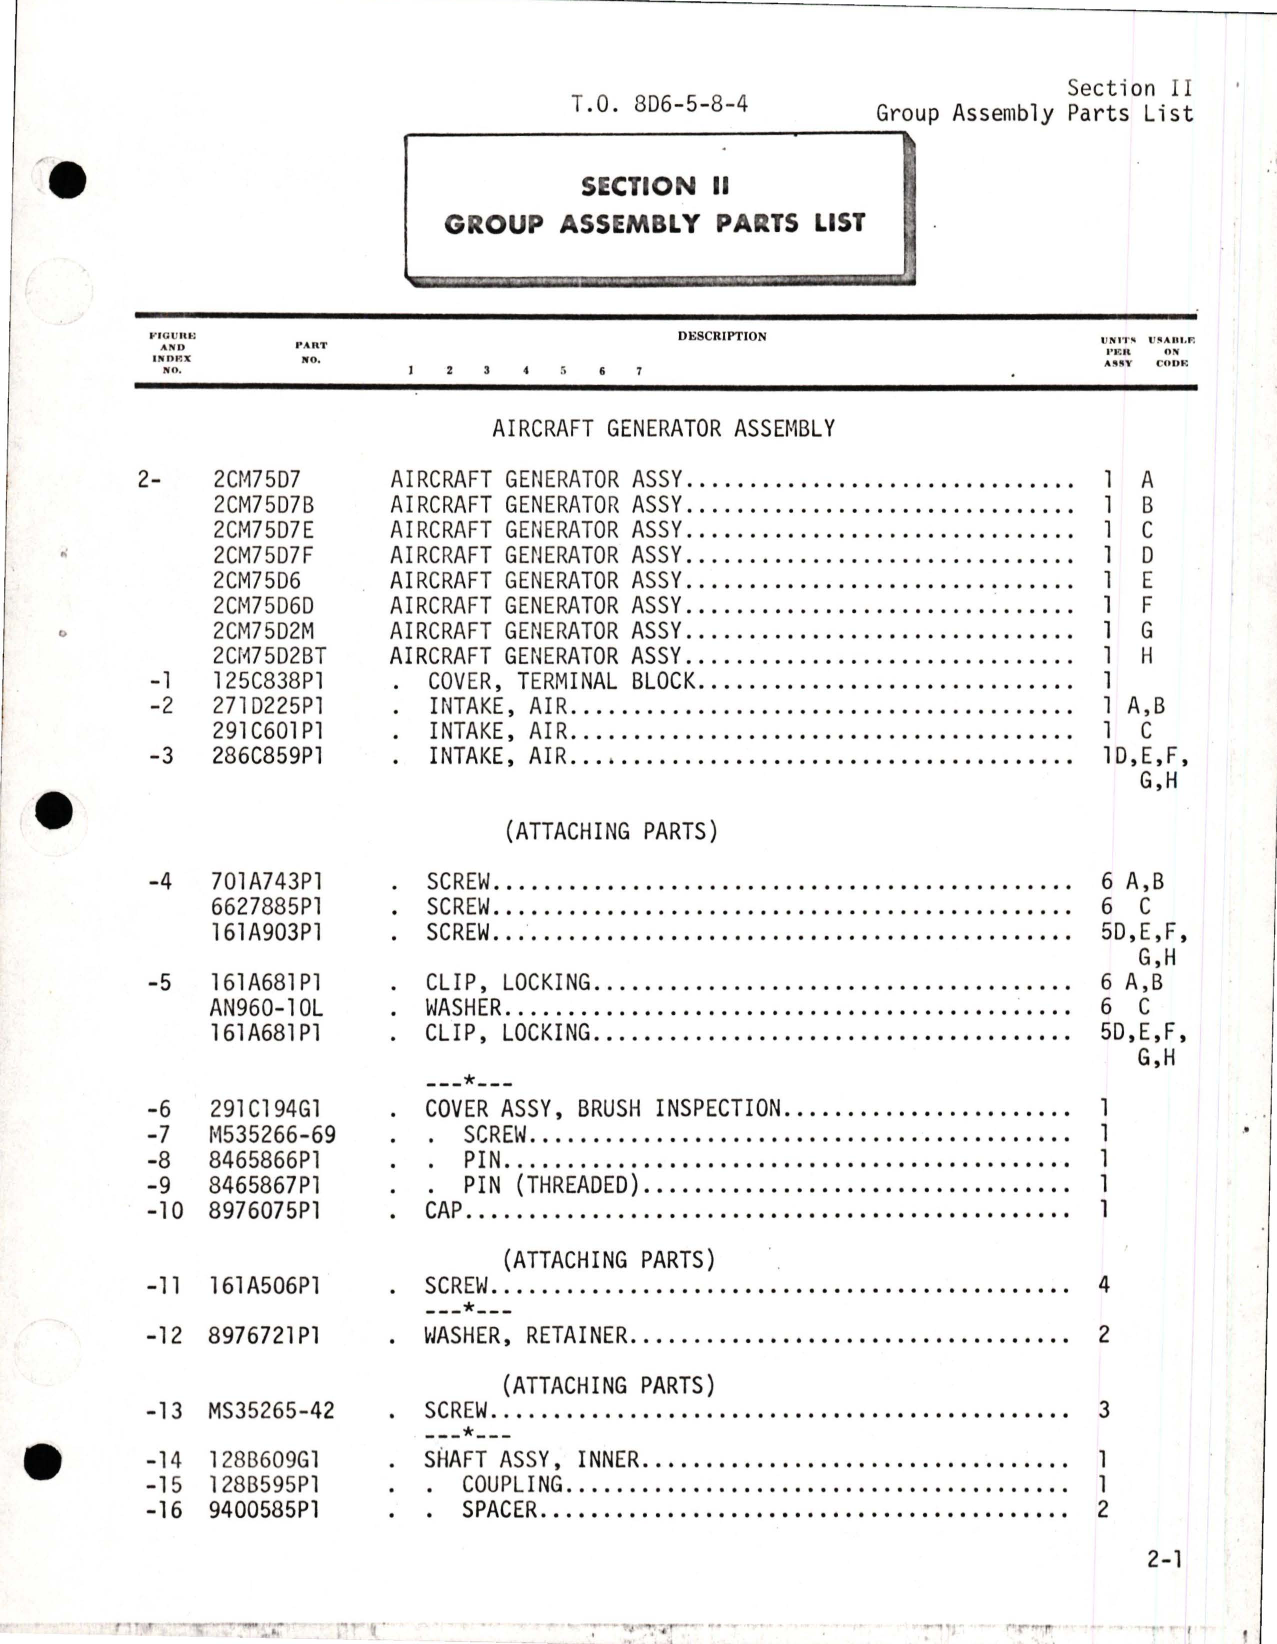 Sample page 5 from AirCorps Library document: Illustrated Parts Breakdown for Aircraft Generator